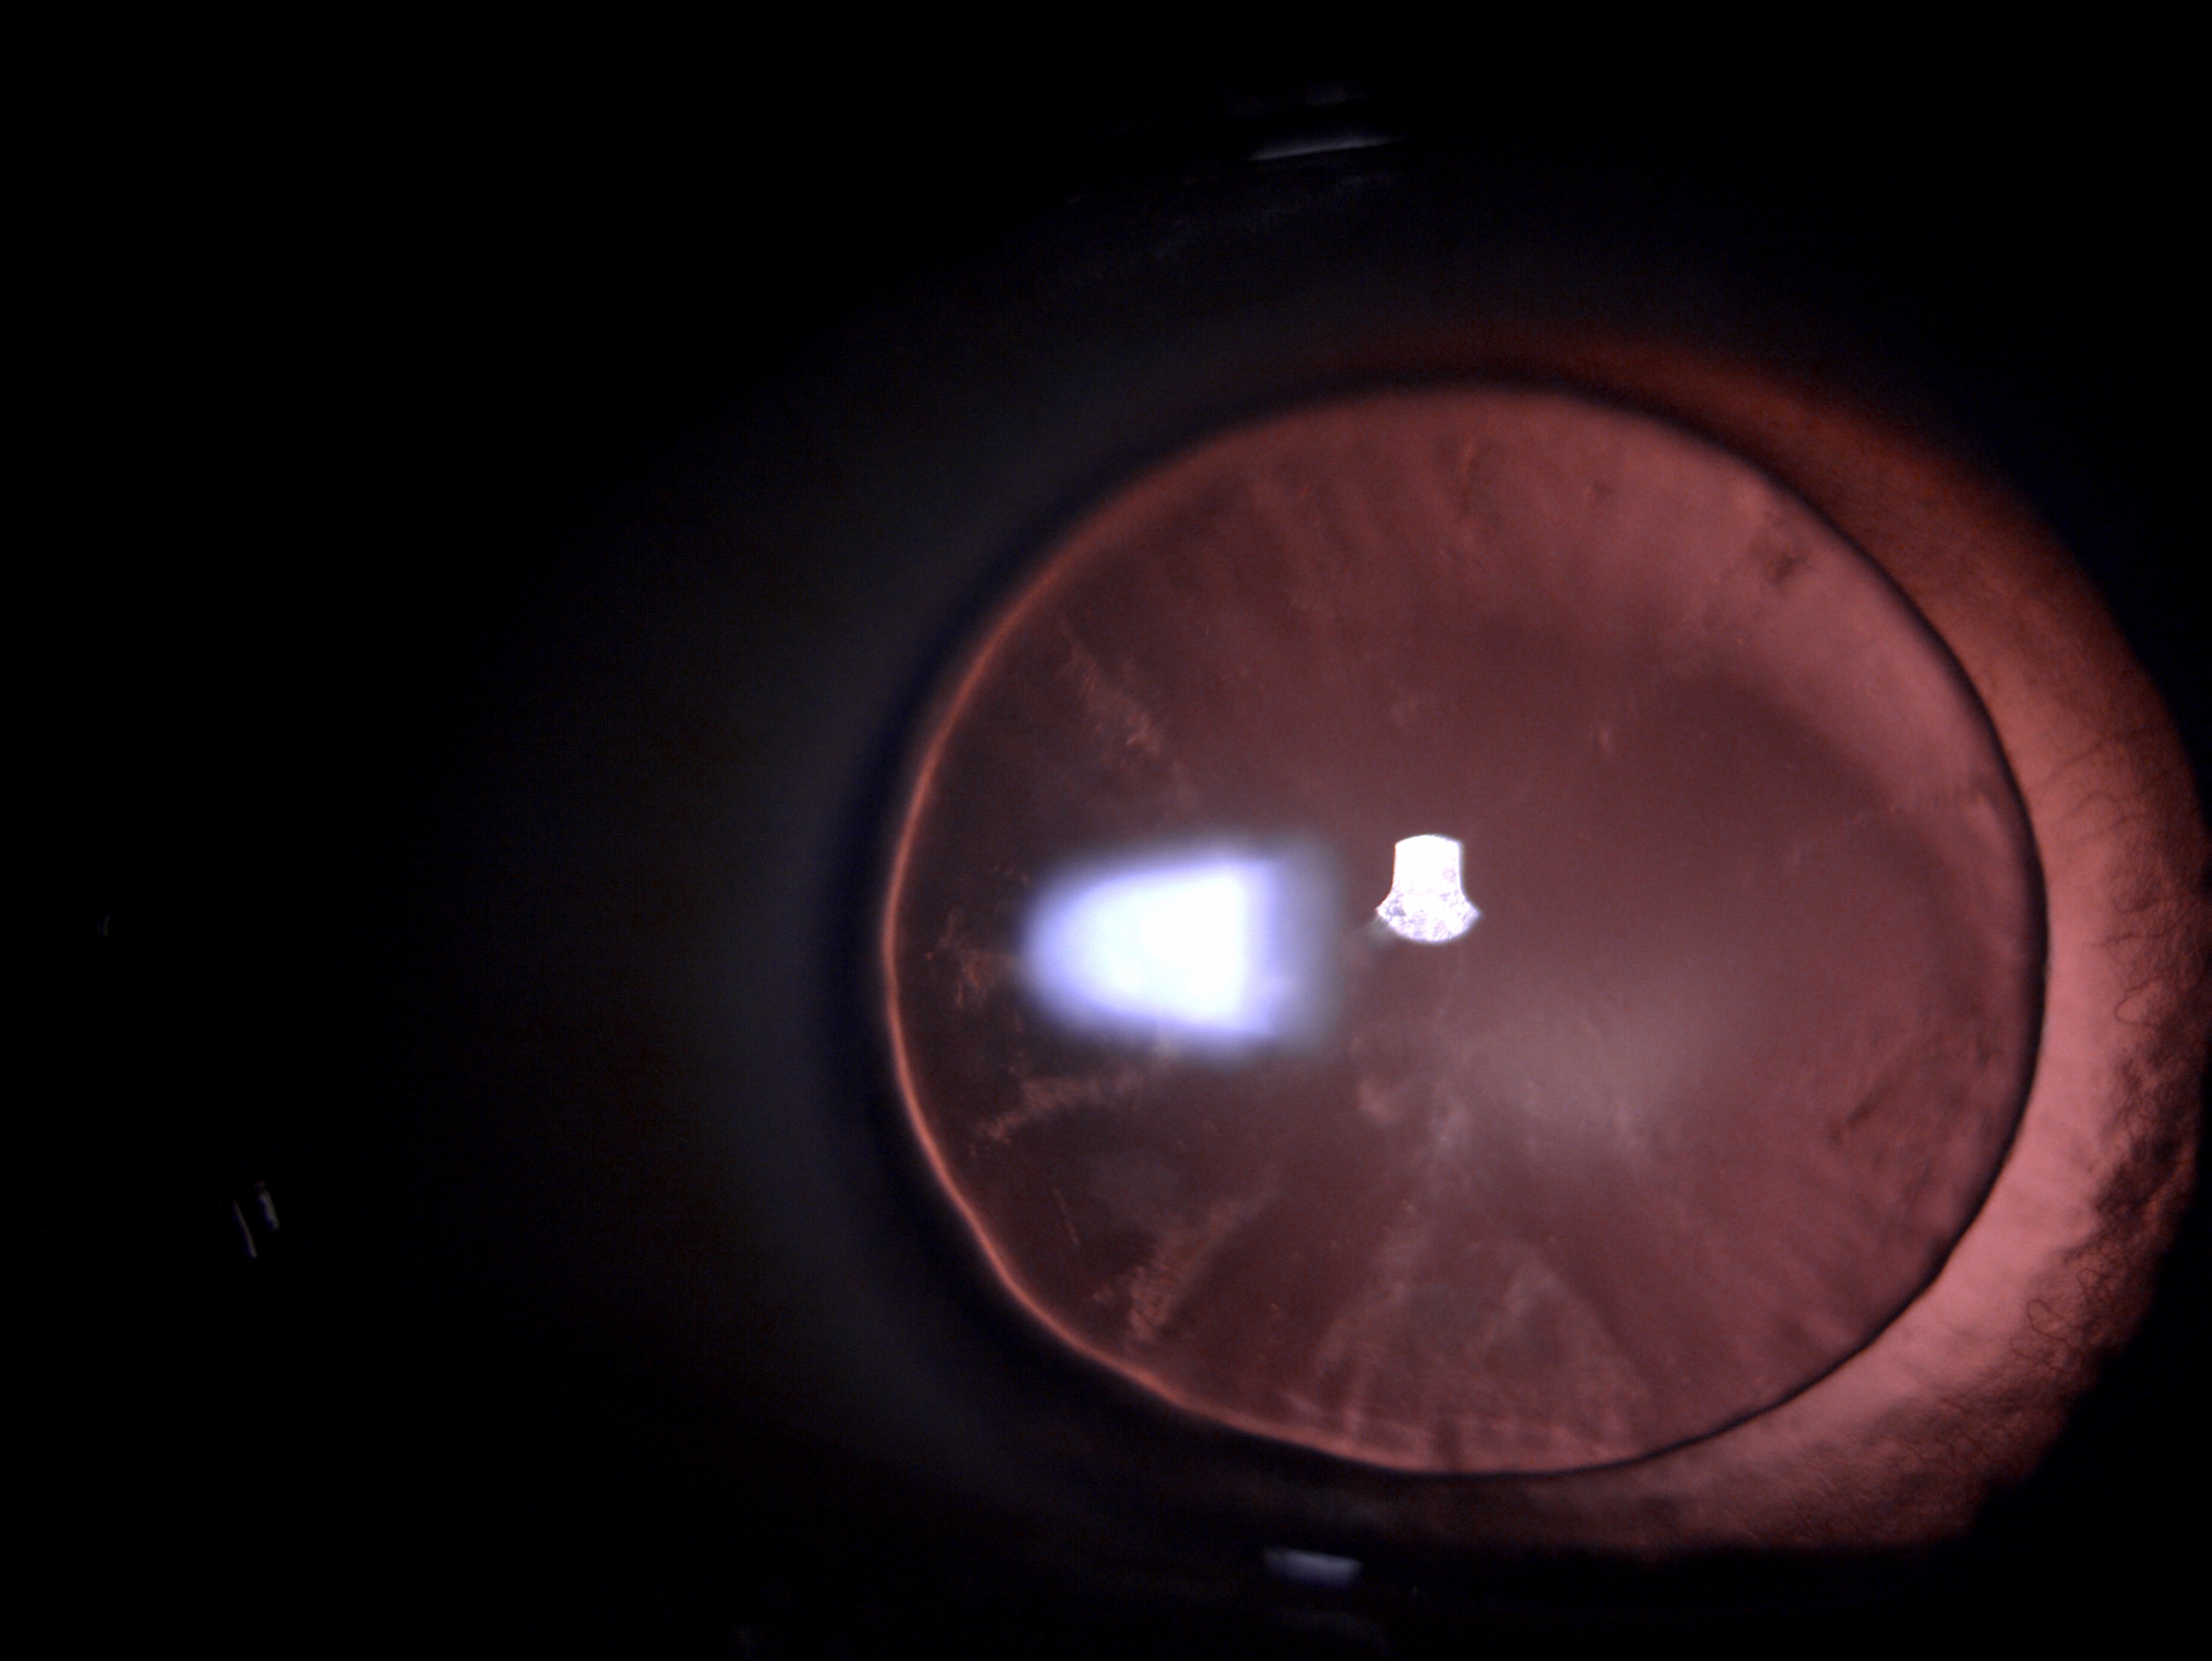 Retro-illumination slit lamp image of the patient depicting small diameter microspherophakic lens with an equator of lens visible on full mydriasis in a patient with Marfan's syndrome